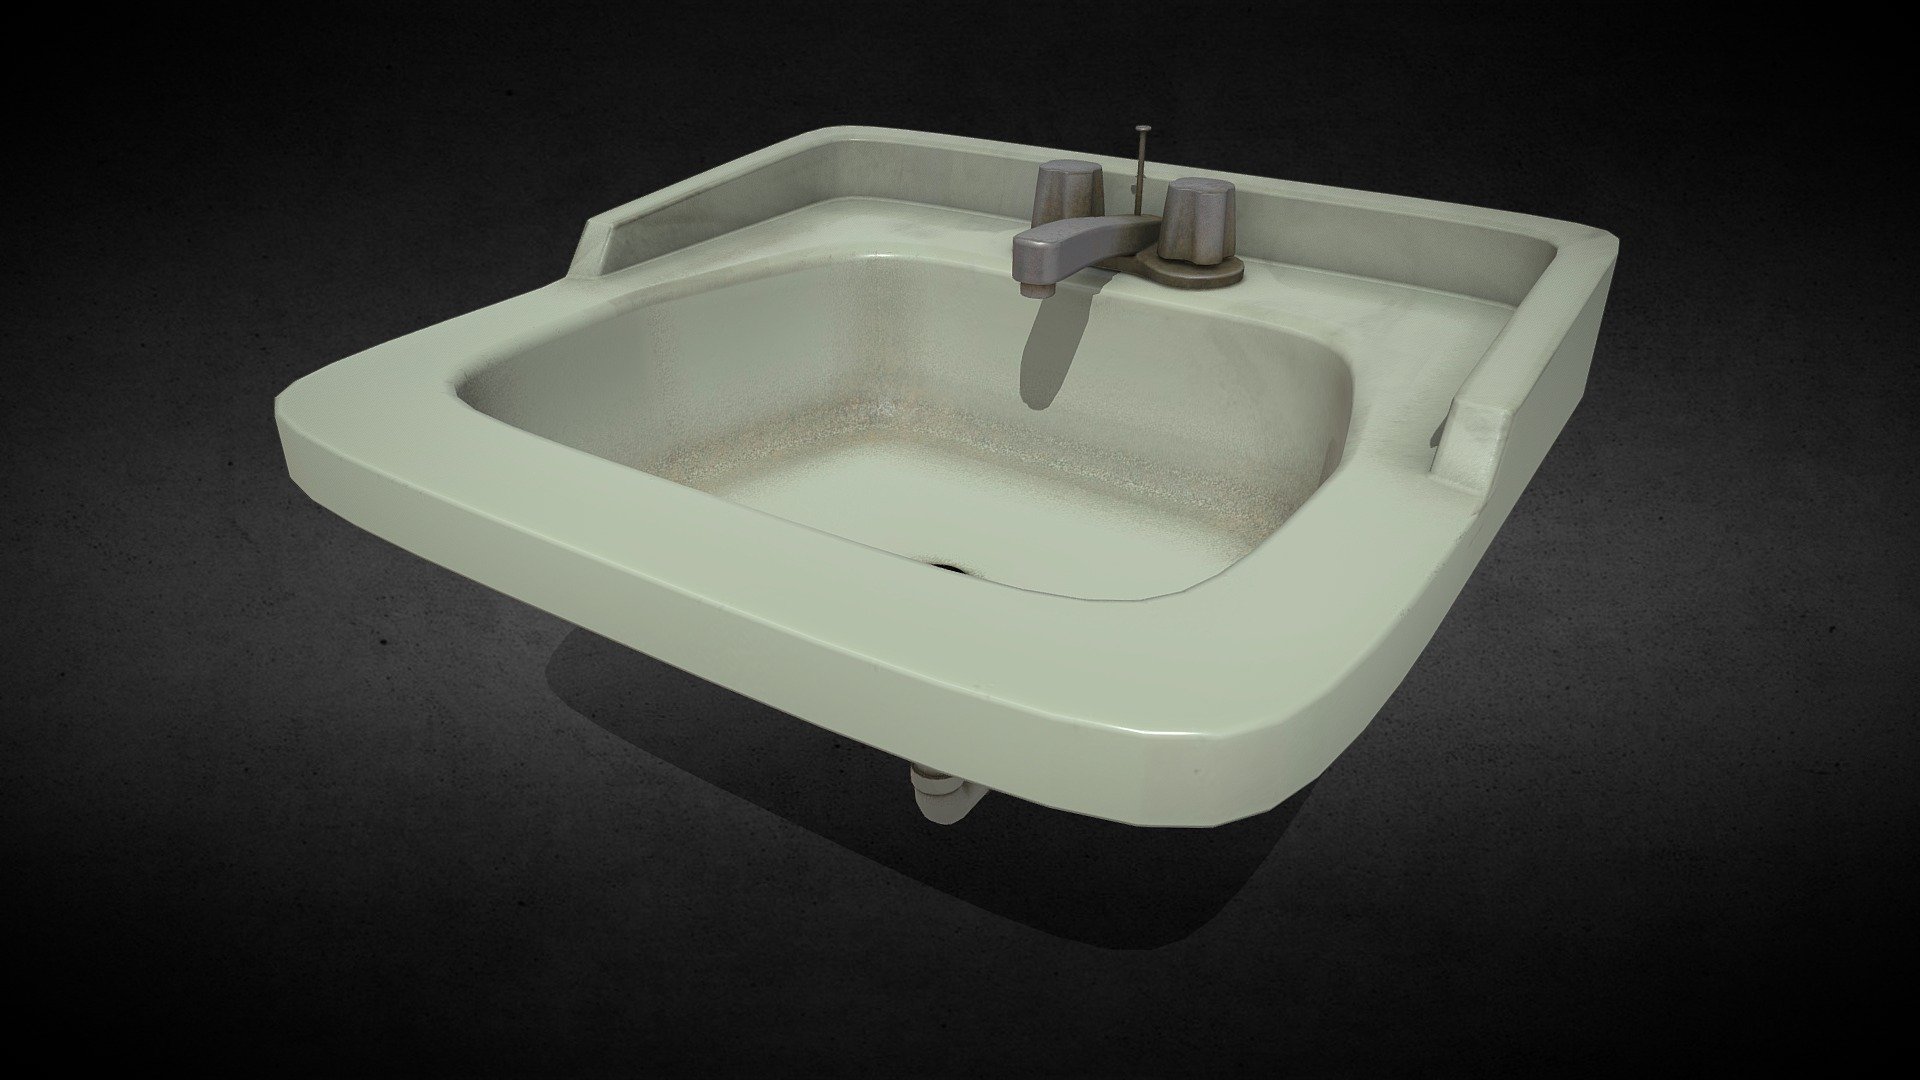 Game Ready Dirty Bathroom Sink Modeled using Maya LT. I give it an old dirty look. the model was textured in Substance Painter 3d model